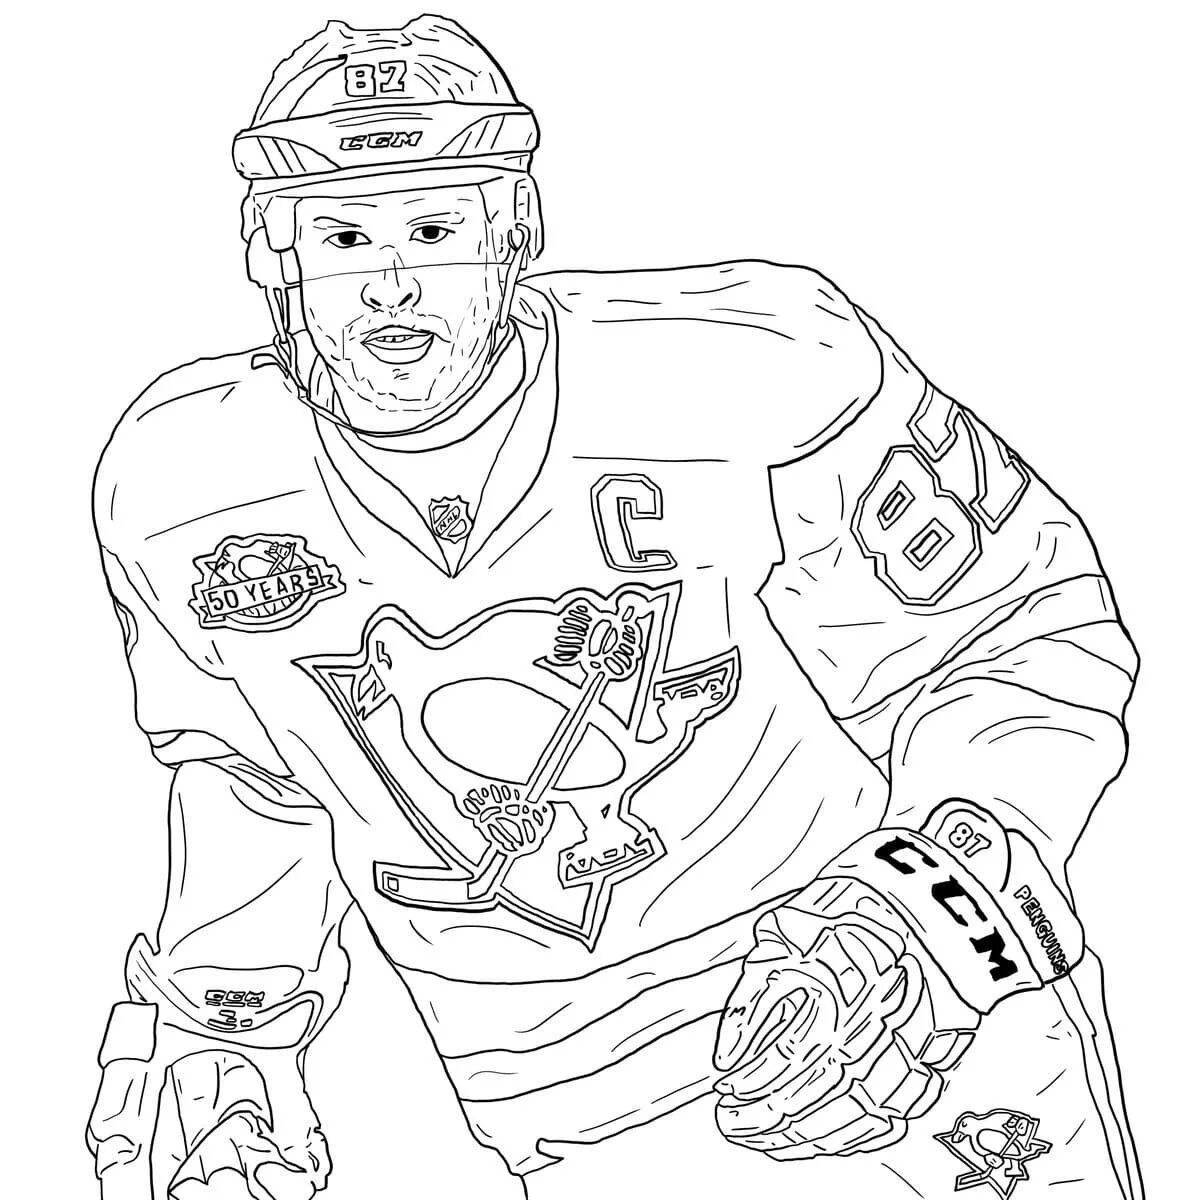 Exquisite Ovechkin coloring book